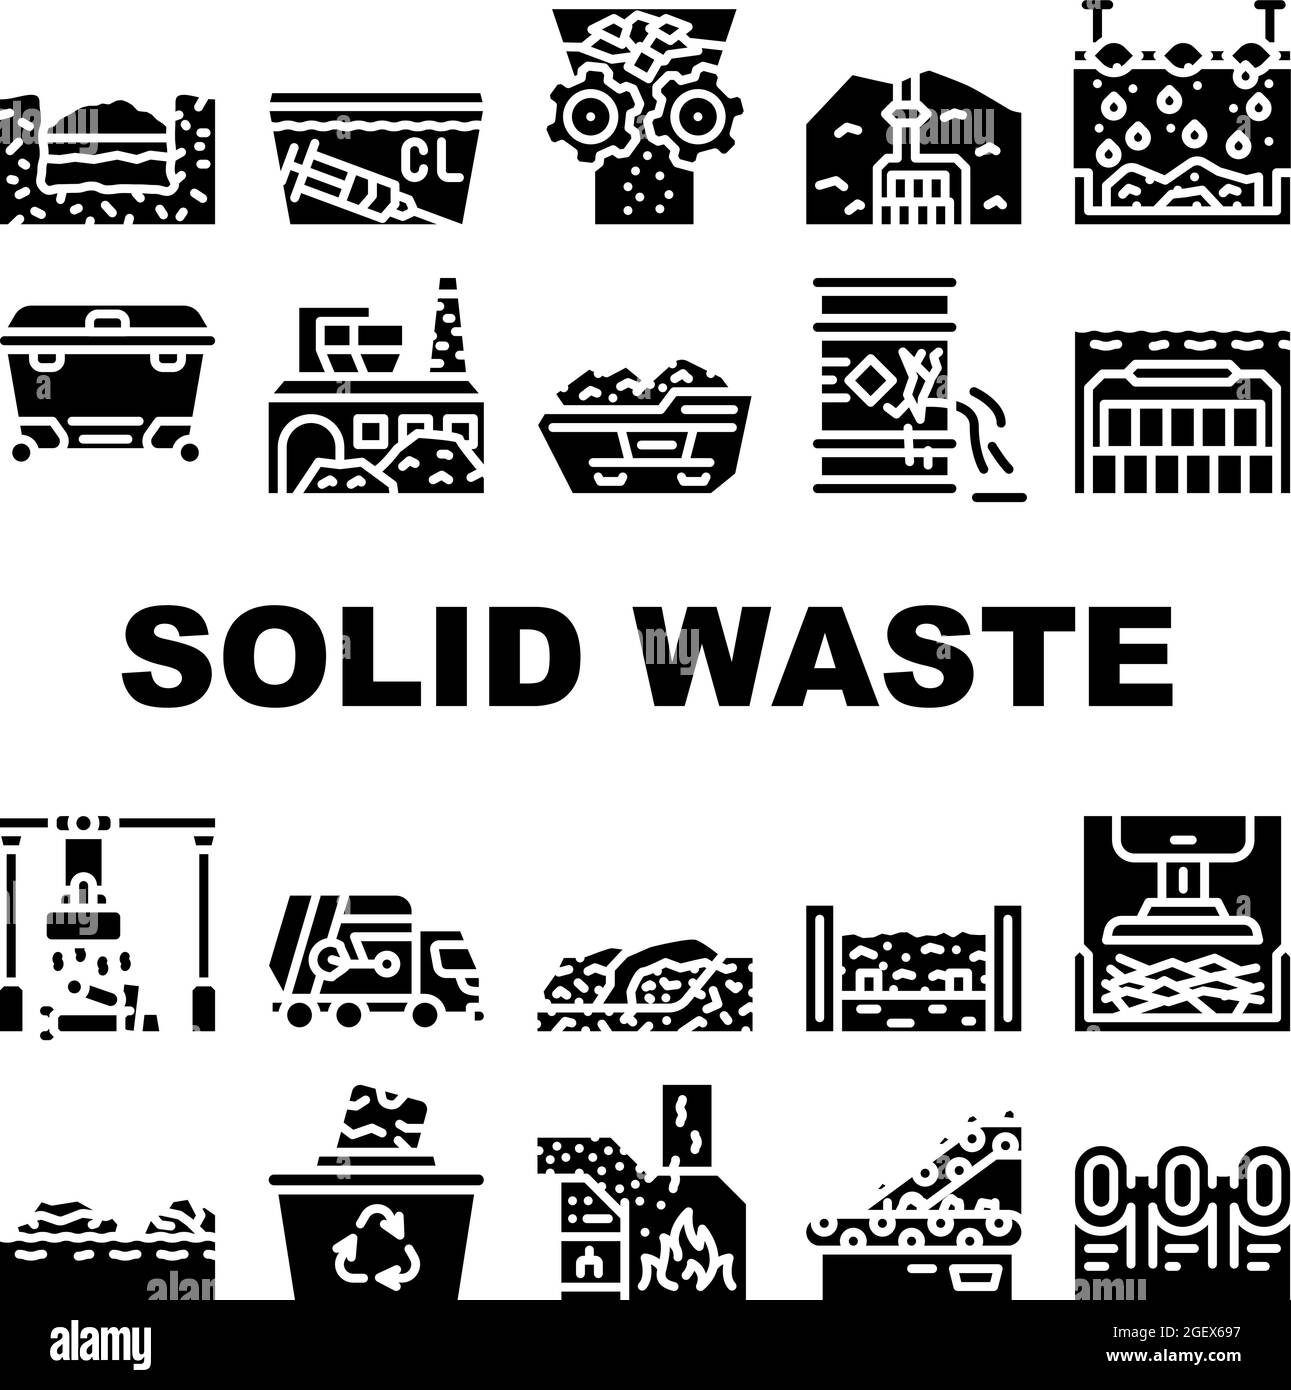 Solid Waste Management Business Icons Set Vector Stock Vector Image